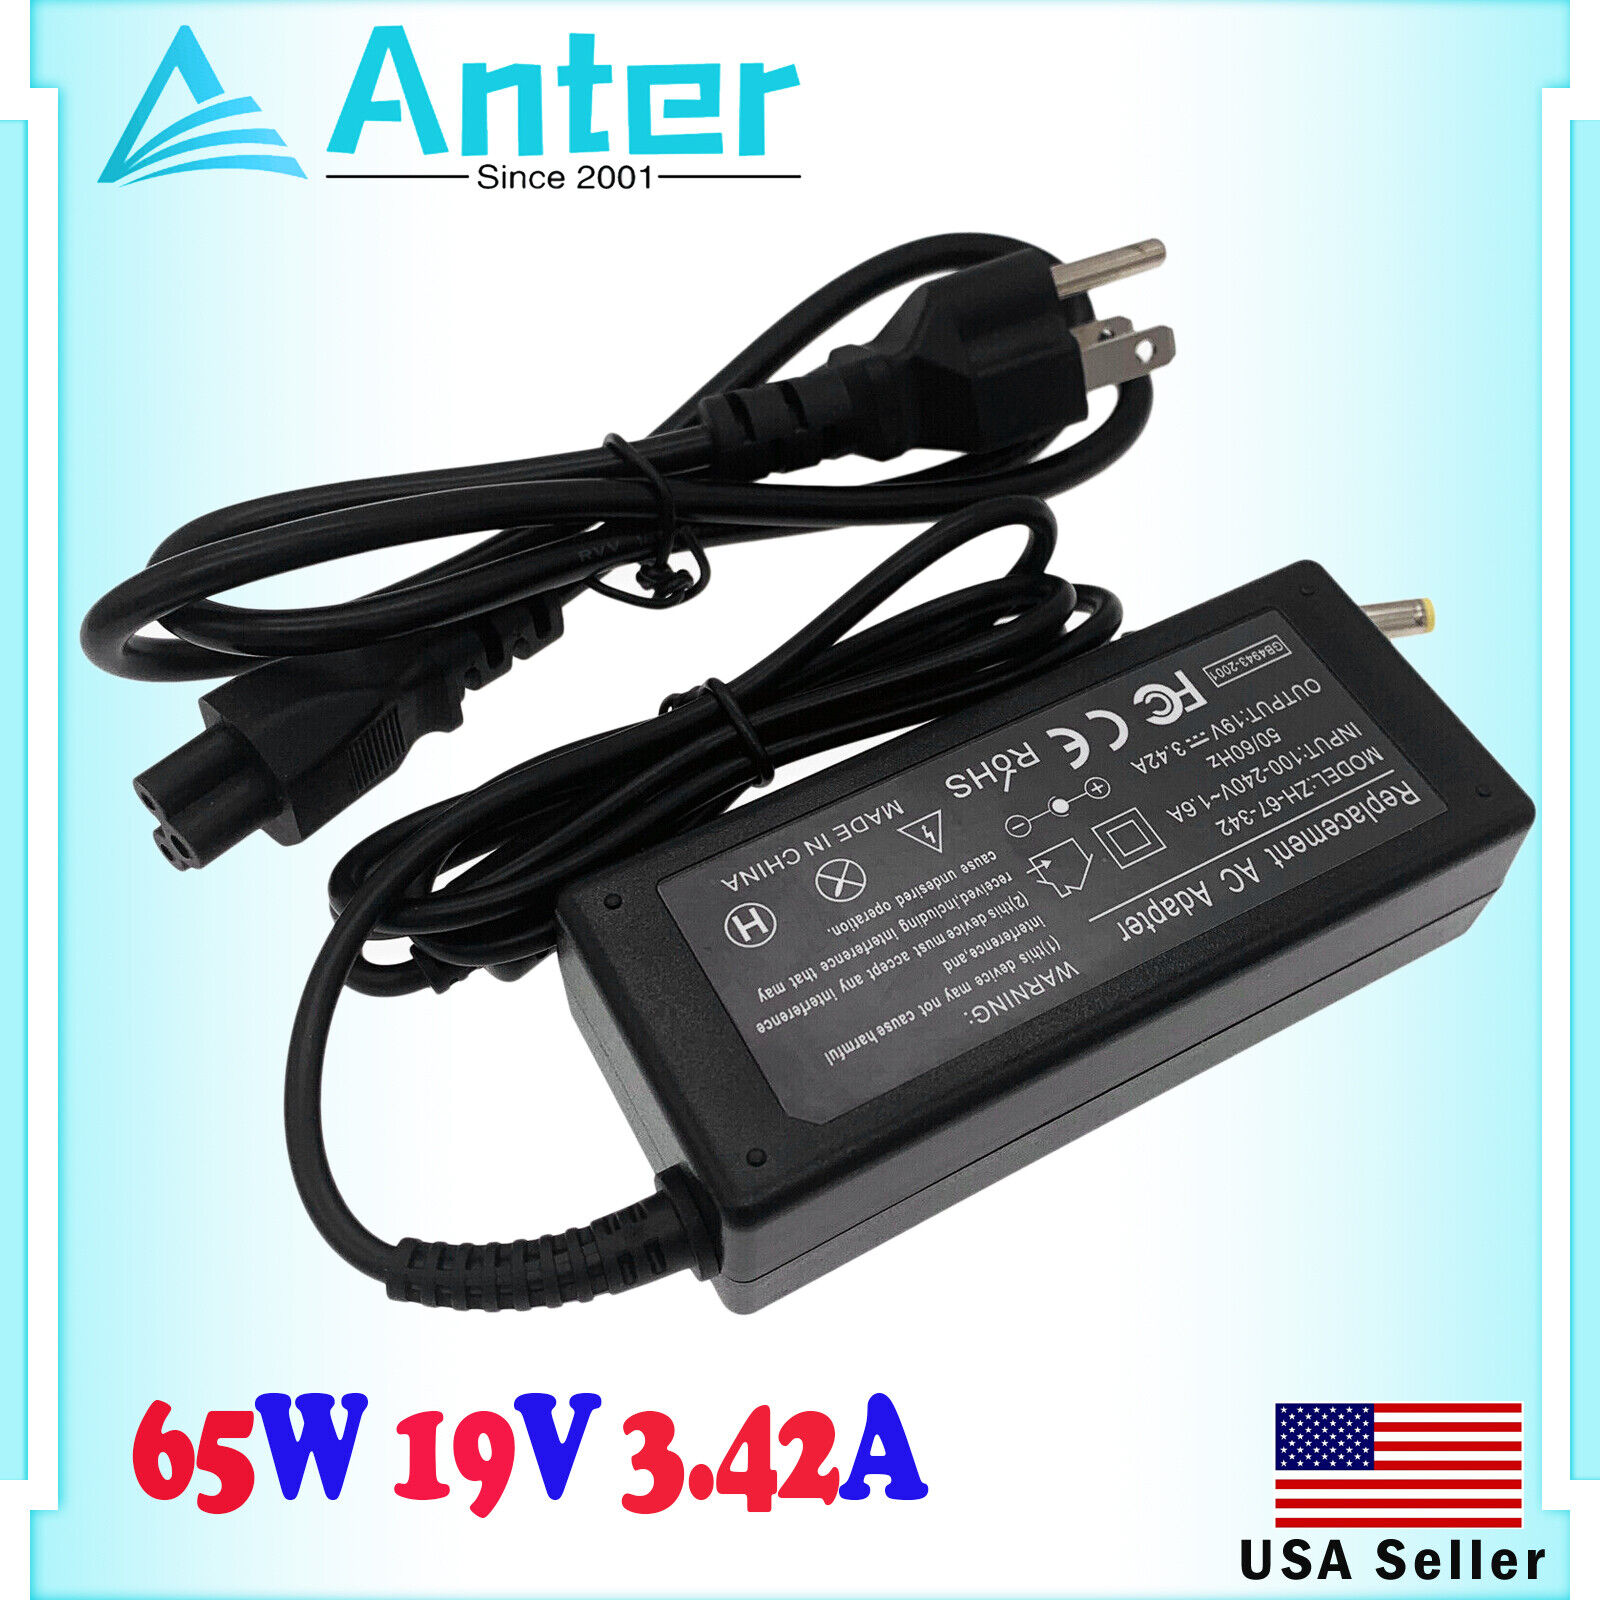 AC Adapter For Acer Aspire C22-860-UR11 C24-865 All-In-One PC Power Supply Cord